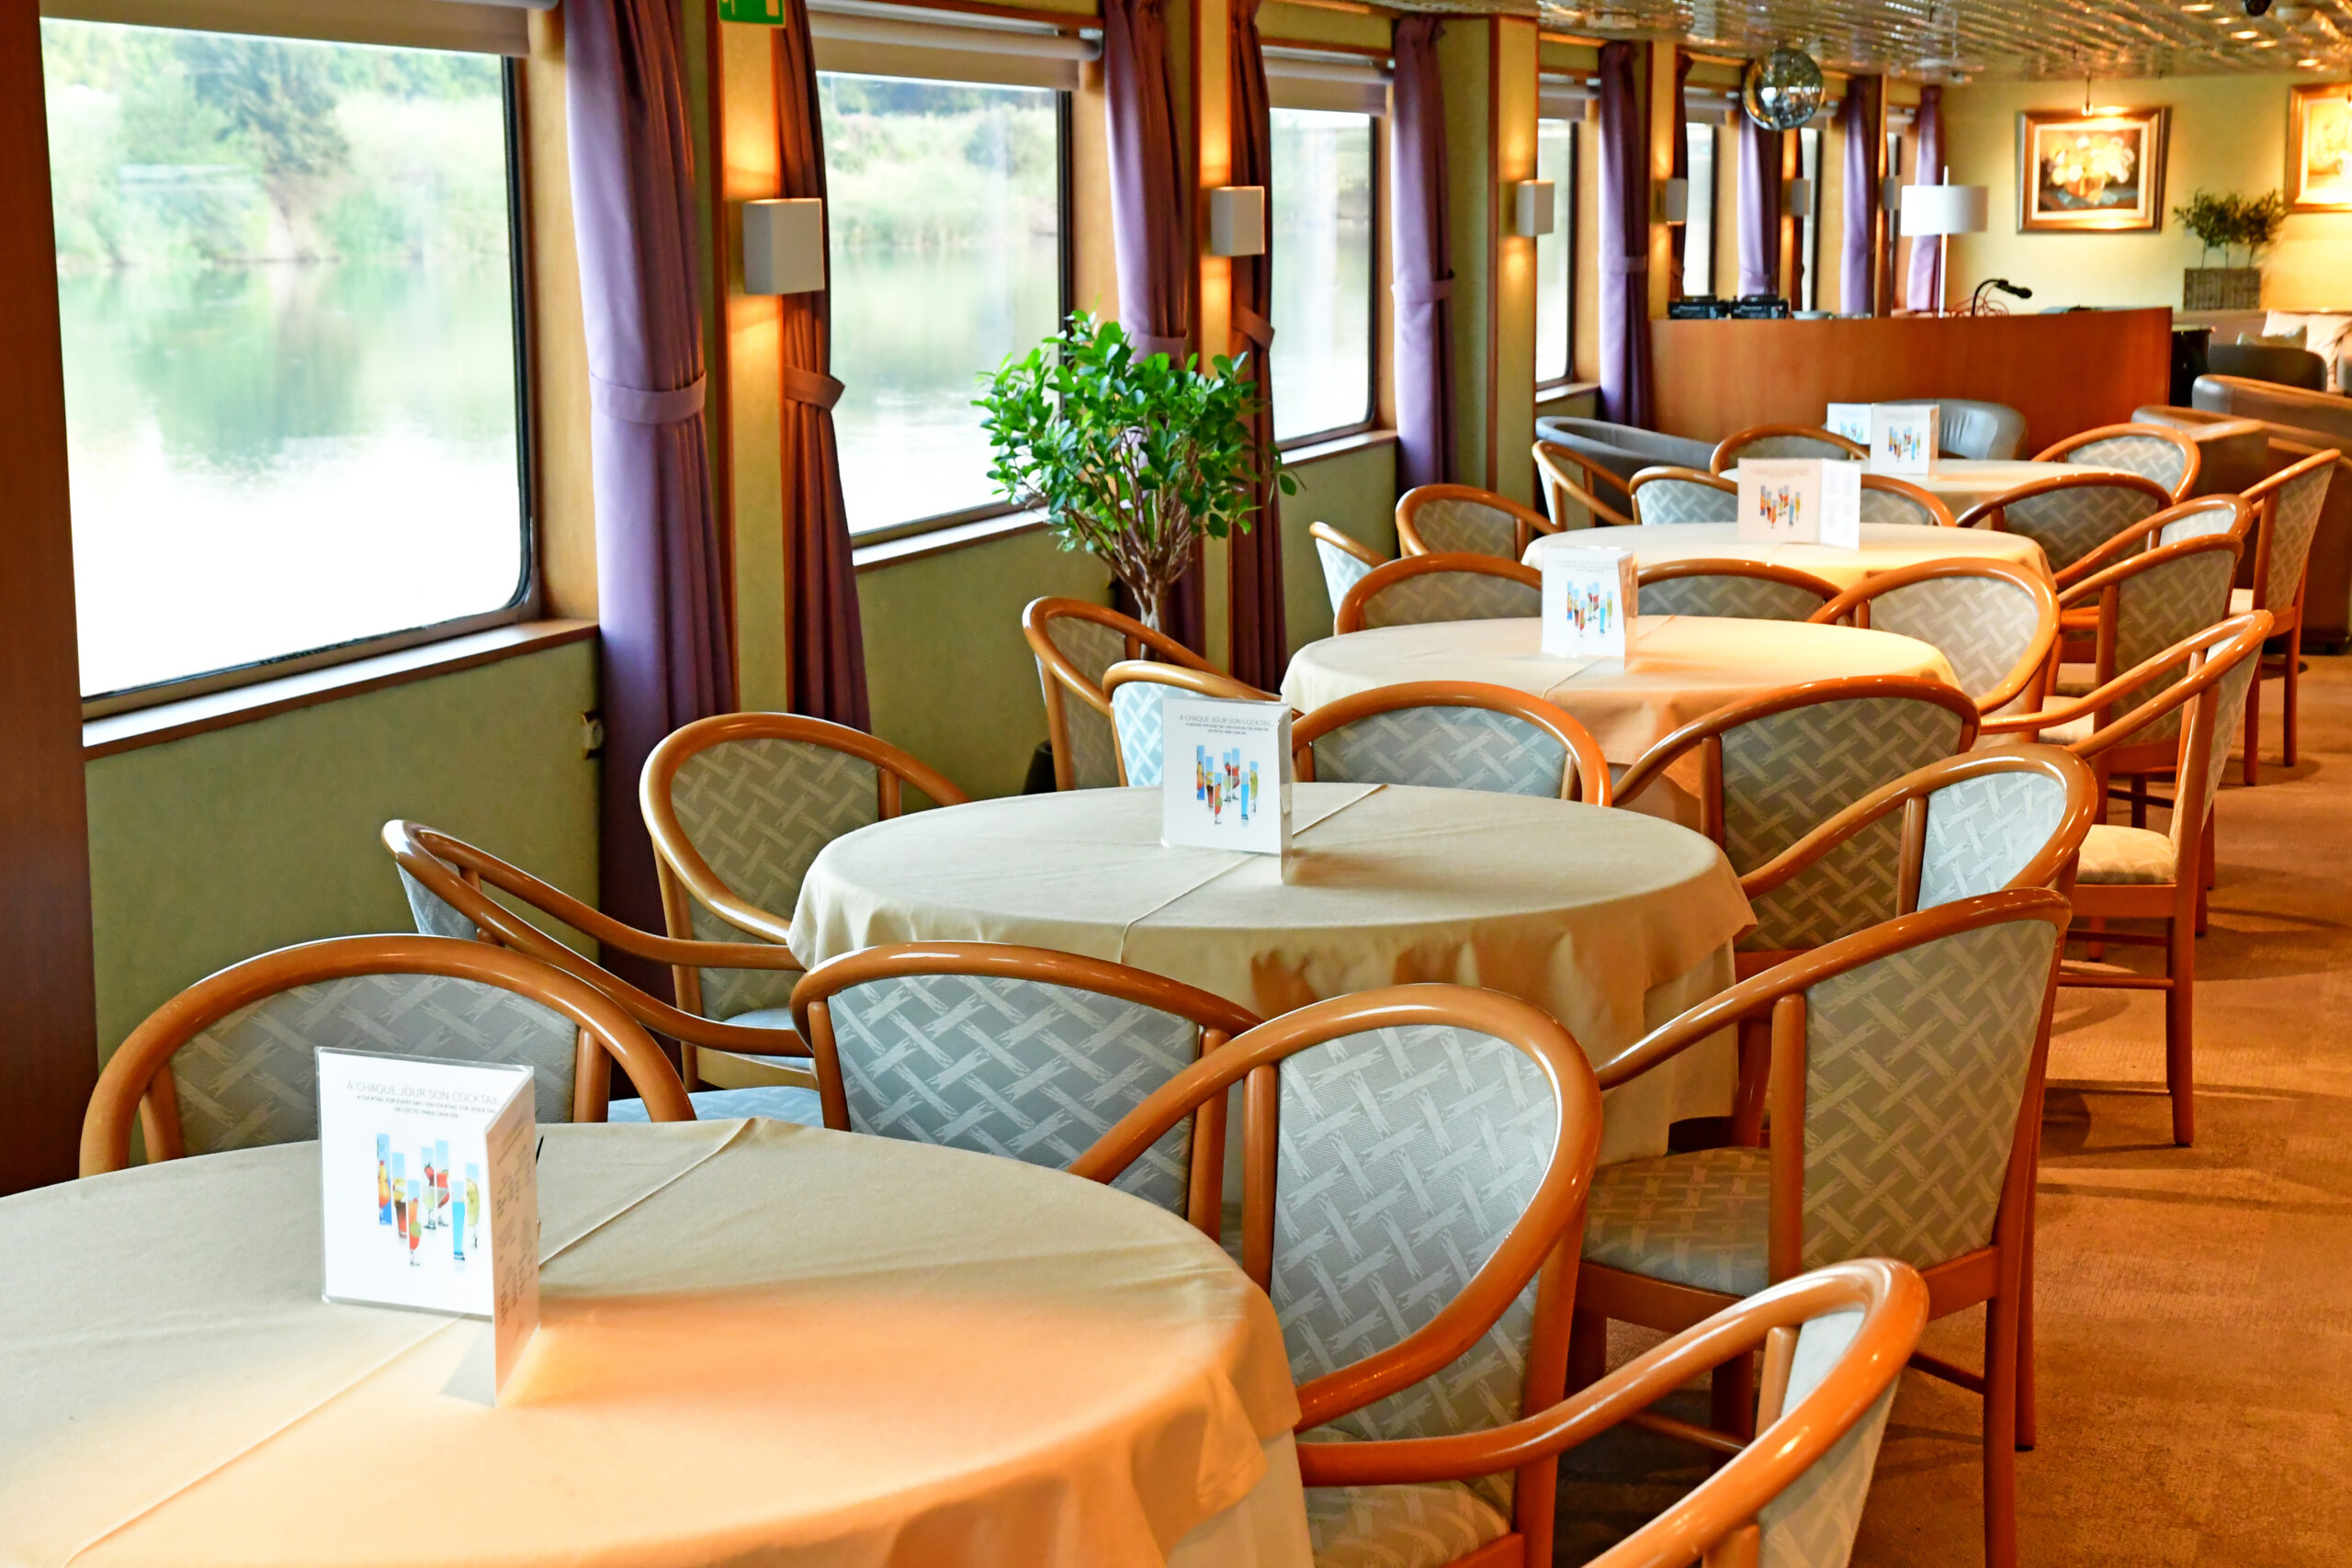 Dining room of river cruise ship.